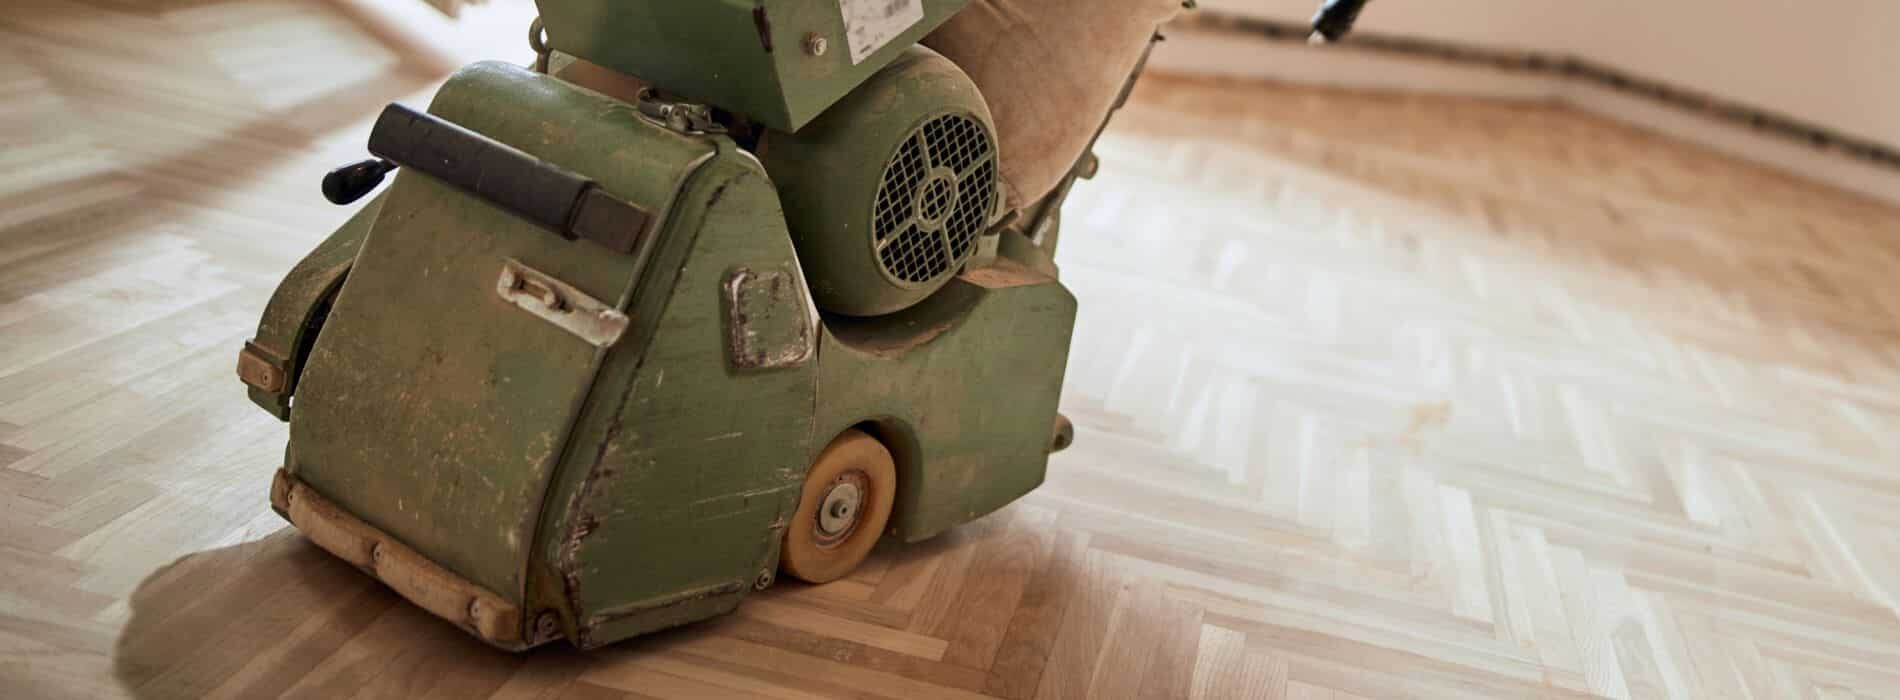 A green Lagler 200mm x 750mm sanding machine sits on top of a stunning hardwood floor, ready to transform it to its former glory.